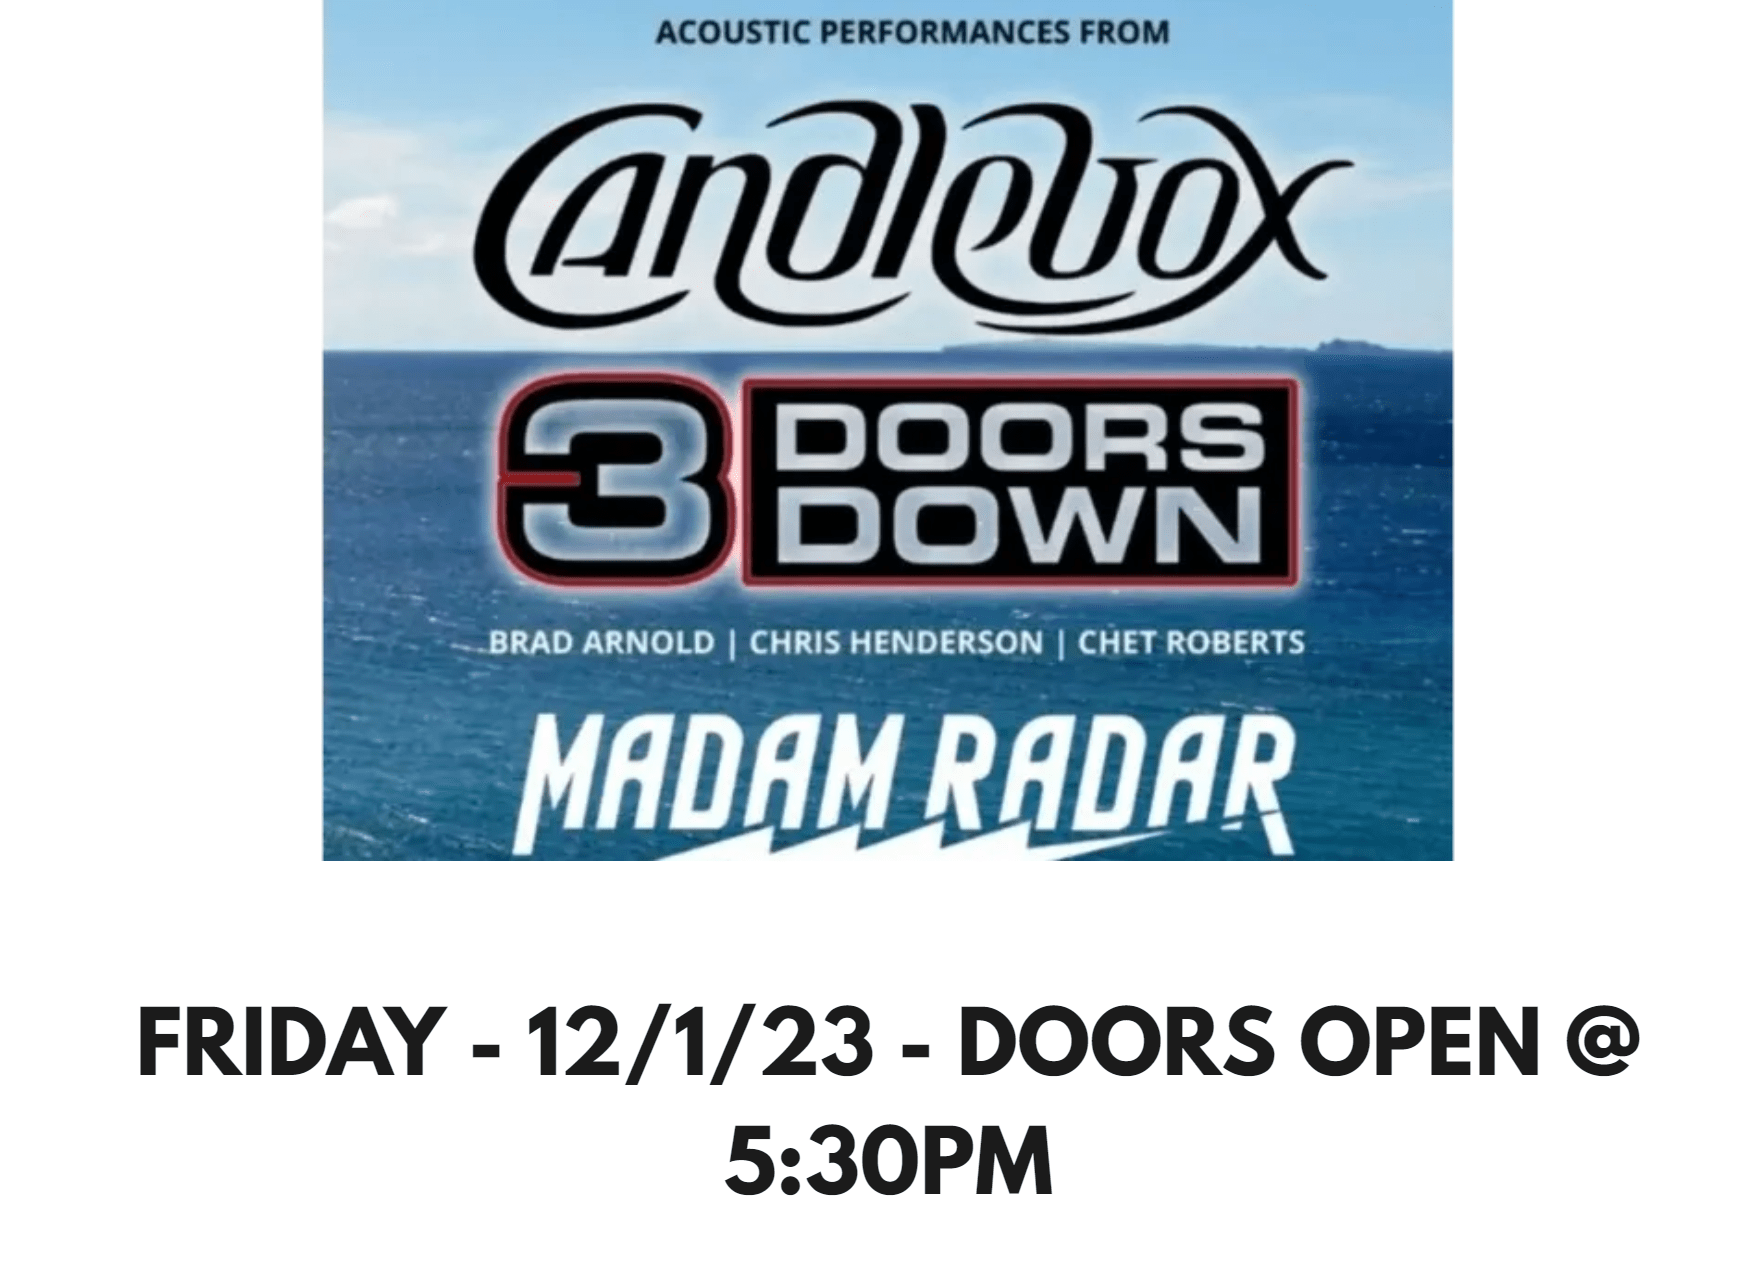 Riptide society's acoustic showcase from candle box, 3 doors down members, and austin's Madam Radar at Haute Spot